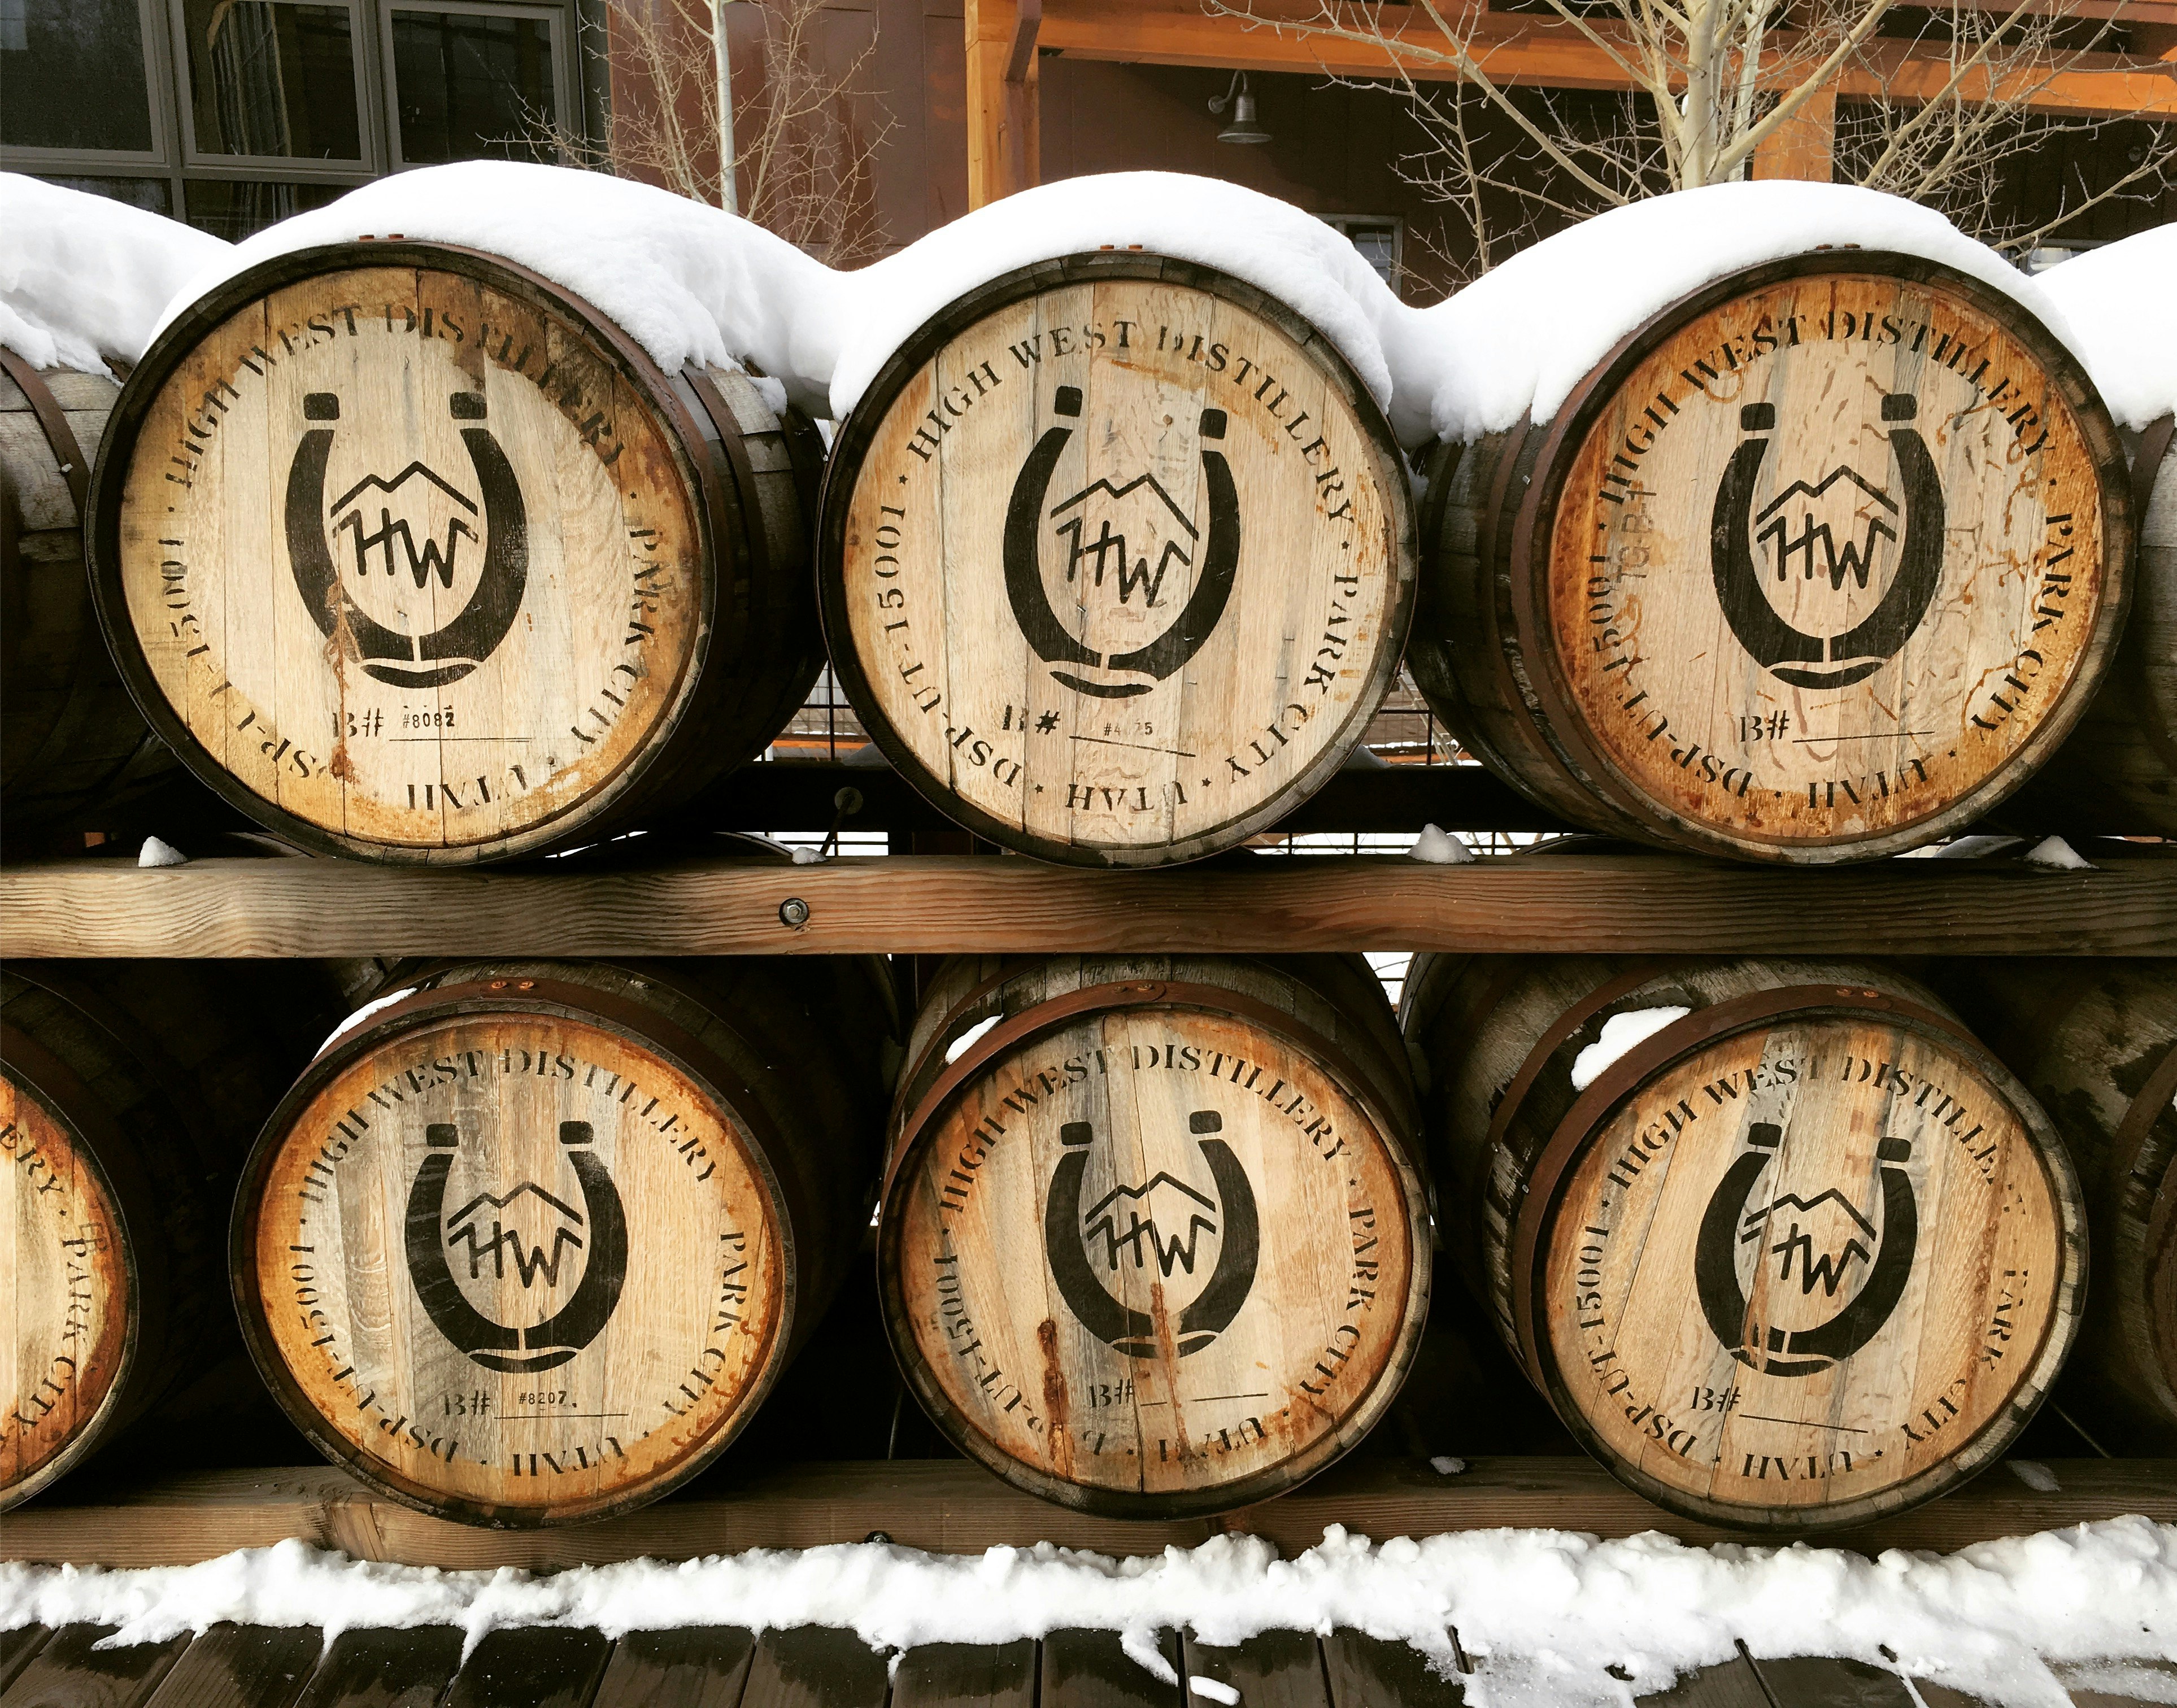 Two rows of wooden barrels are shelved outside. The barrels on the top are covered with snow; unusual distilleries  